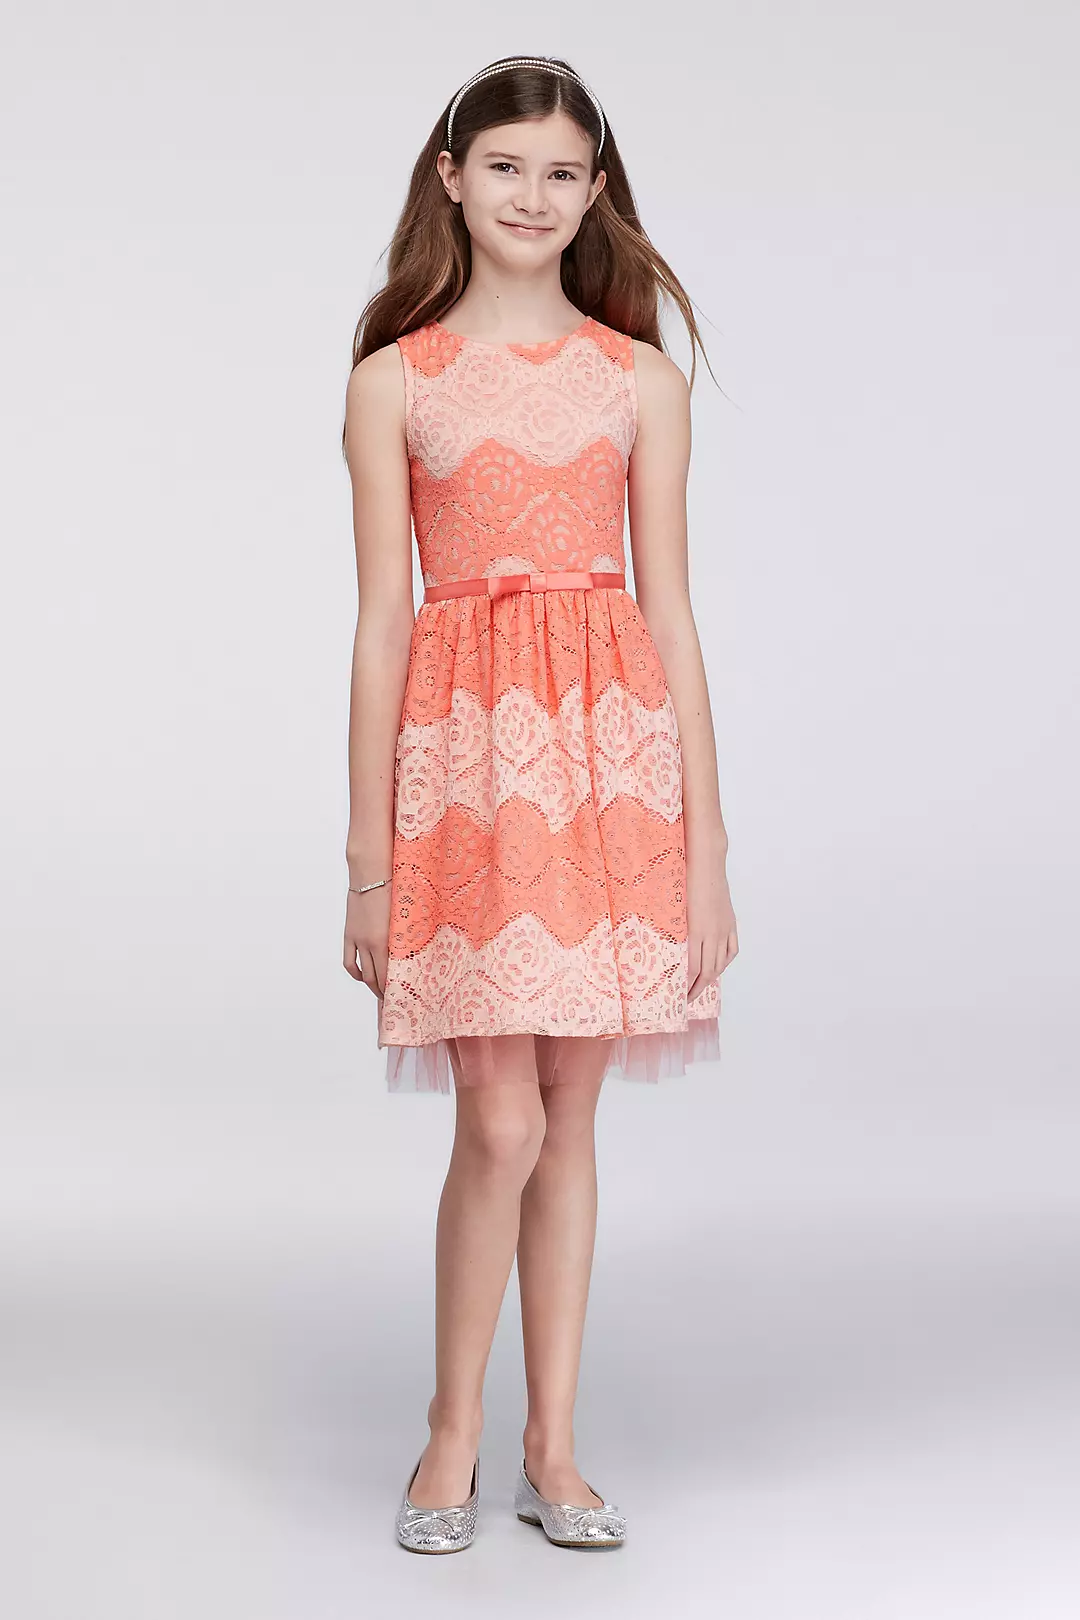 Two-Tone Lace Party Dress with Satin Bow Waist  Image